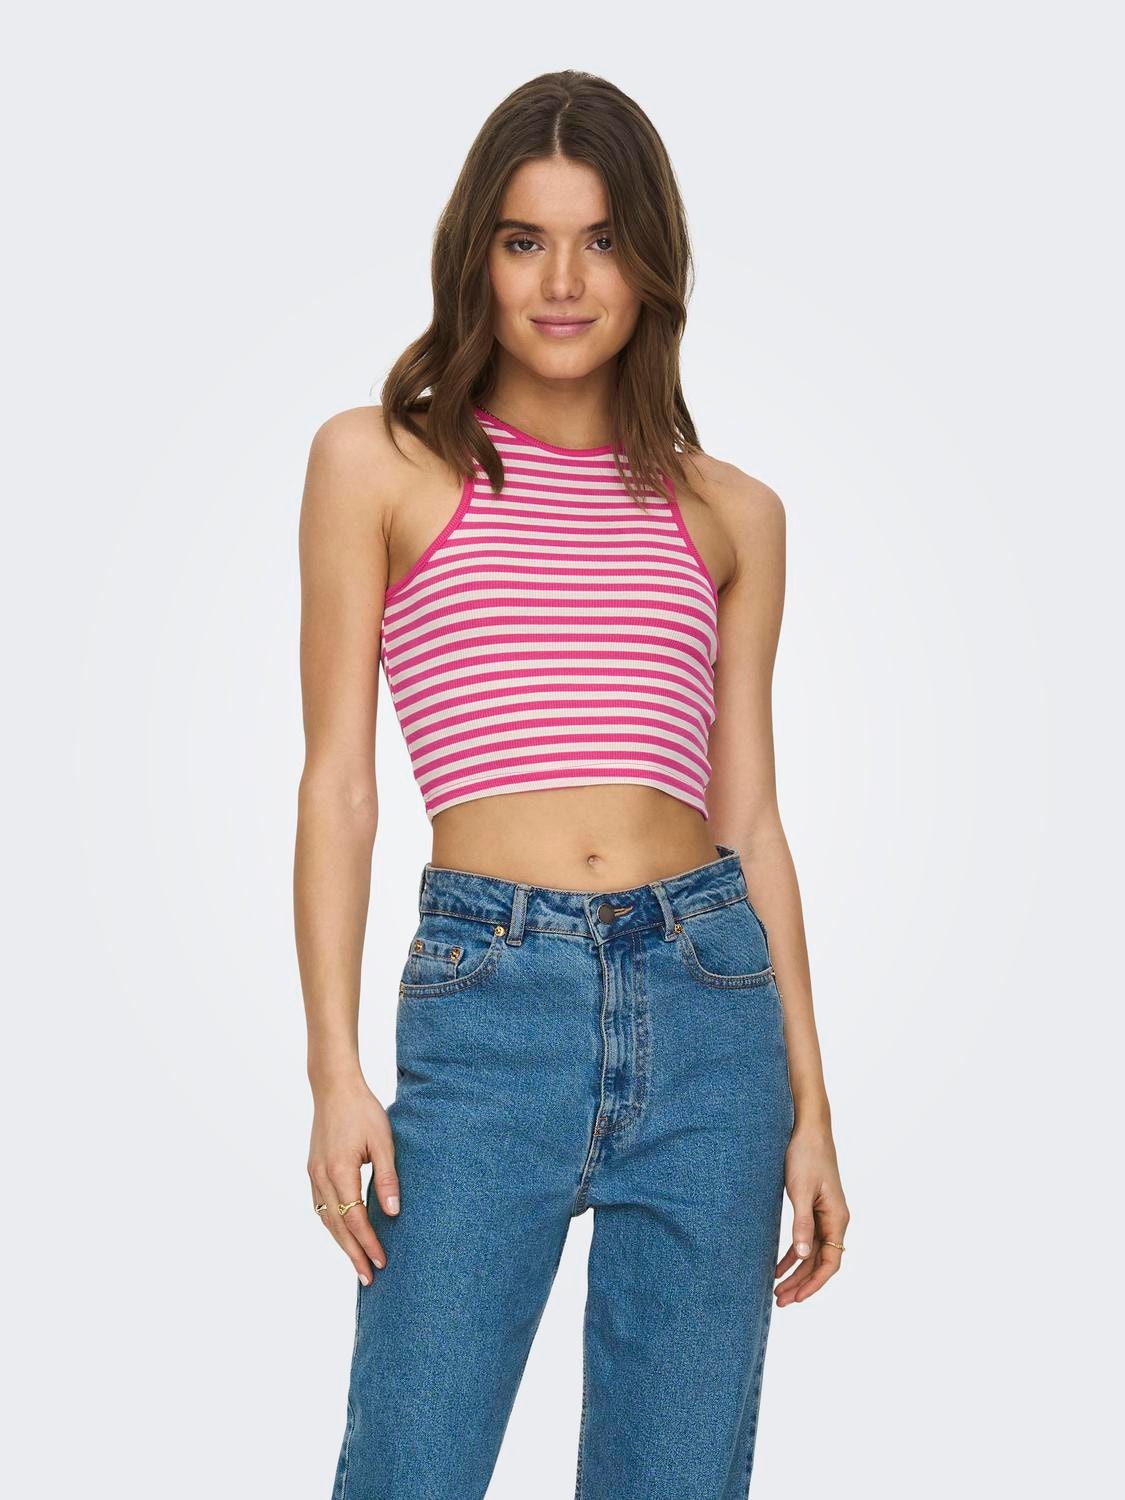 ONLY Cropped fit O-hals Top -Fuchsia Purple - 15289846